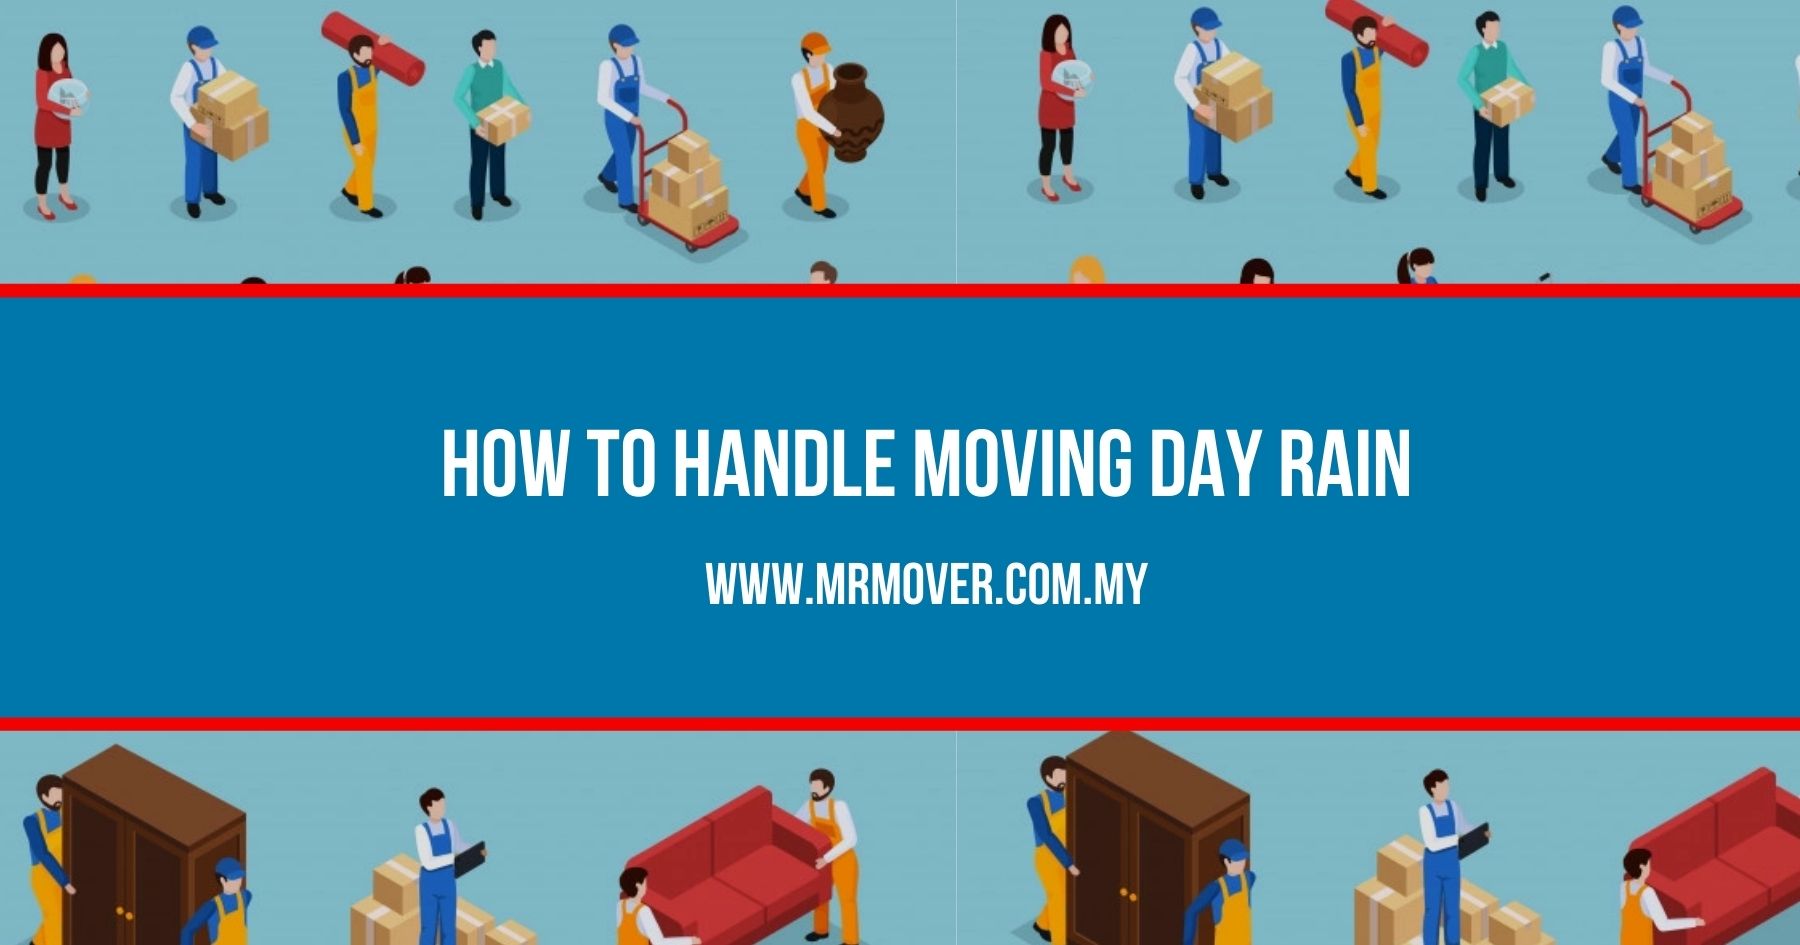 How To Handle Moving Day Rain